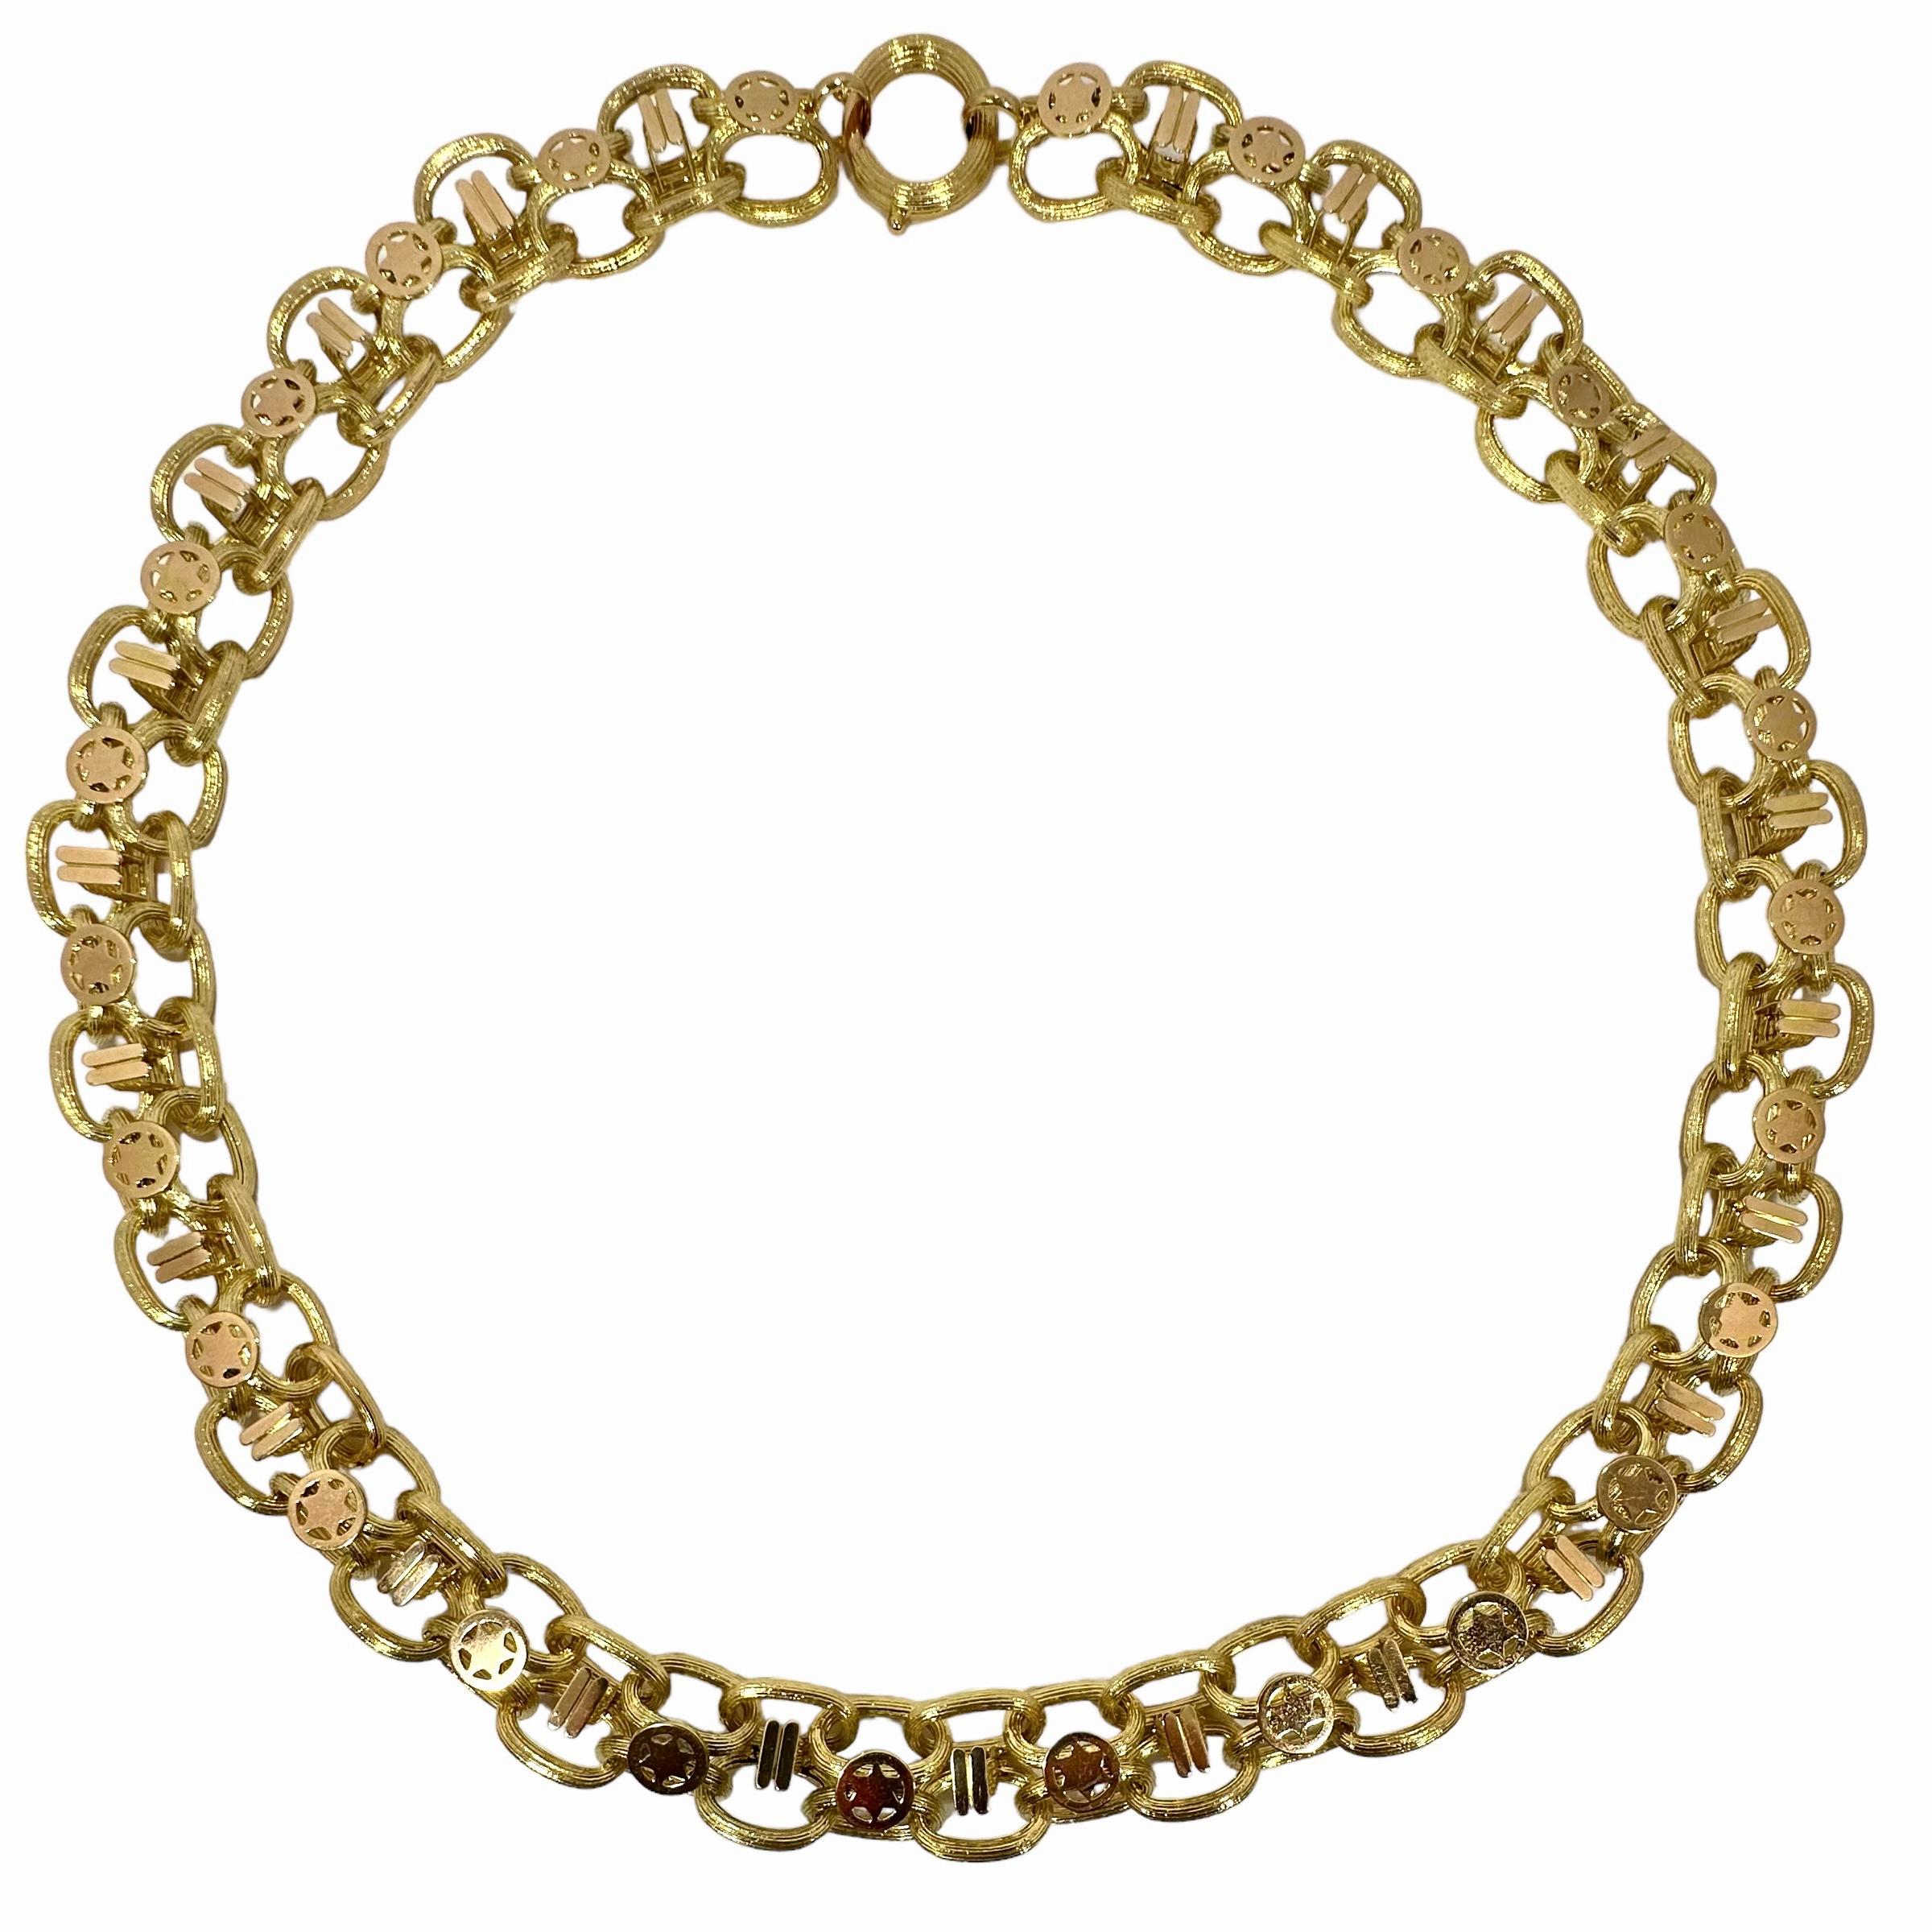 Women's Victorian 14K Yellow Gold Reversible Necklace - 22 Inches Long X 5/8  Inch Wide